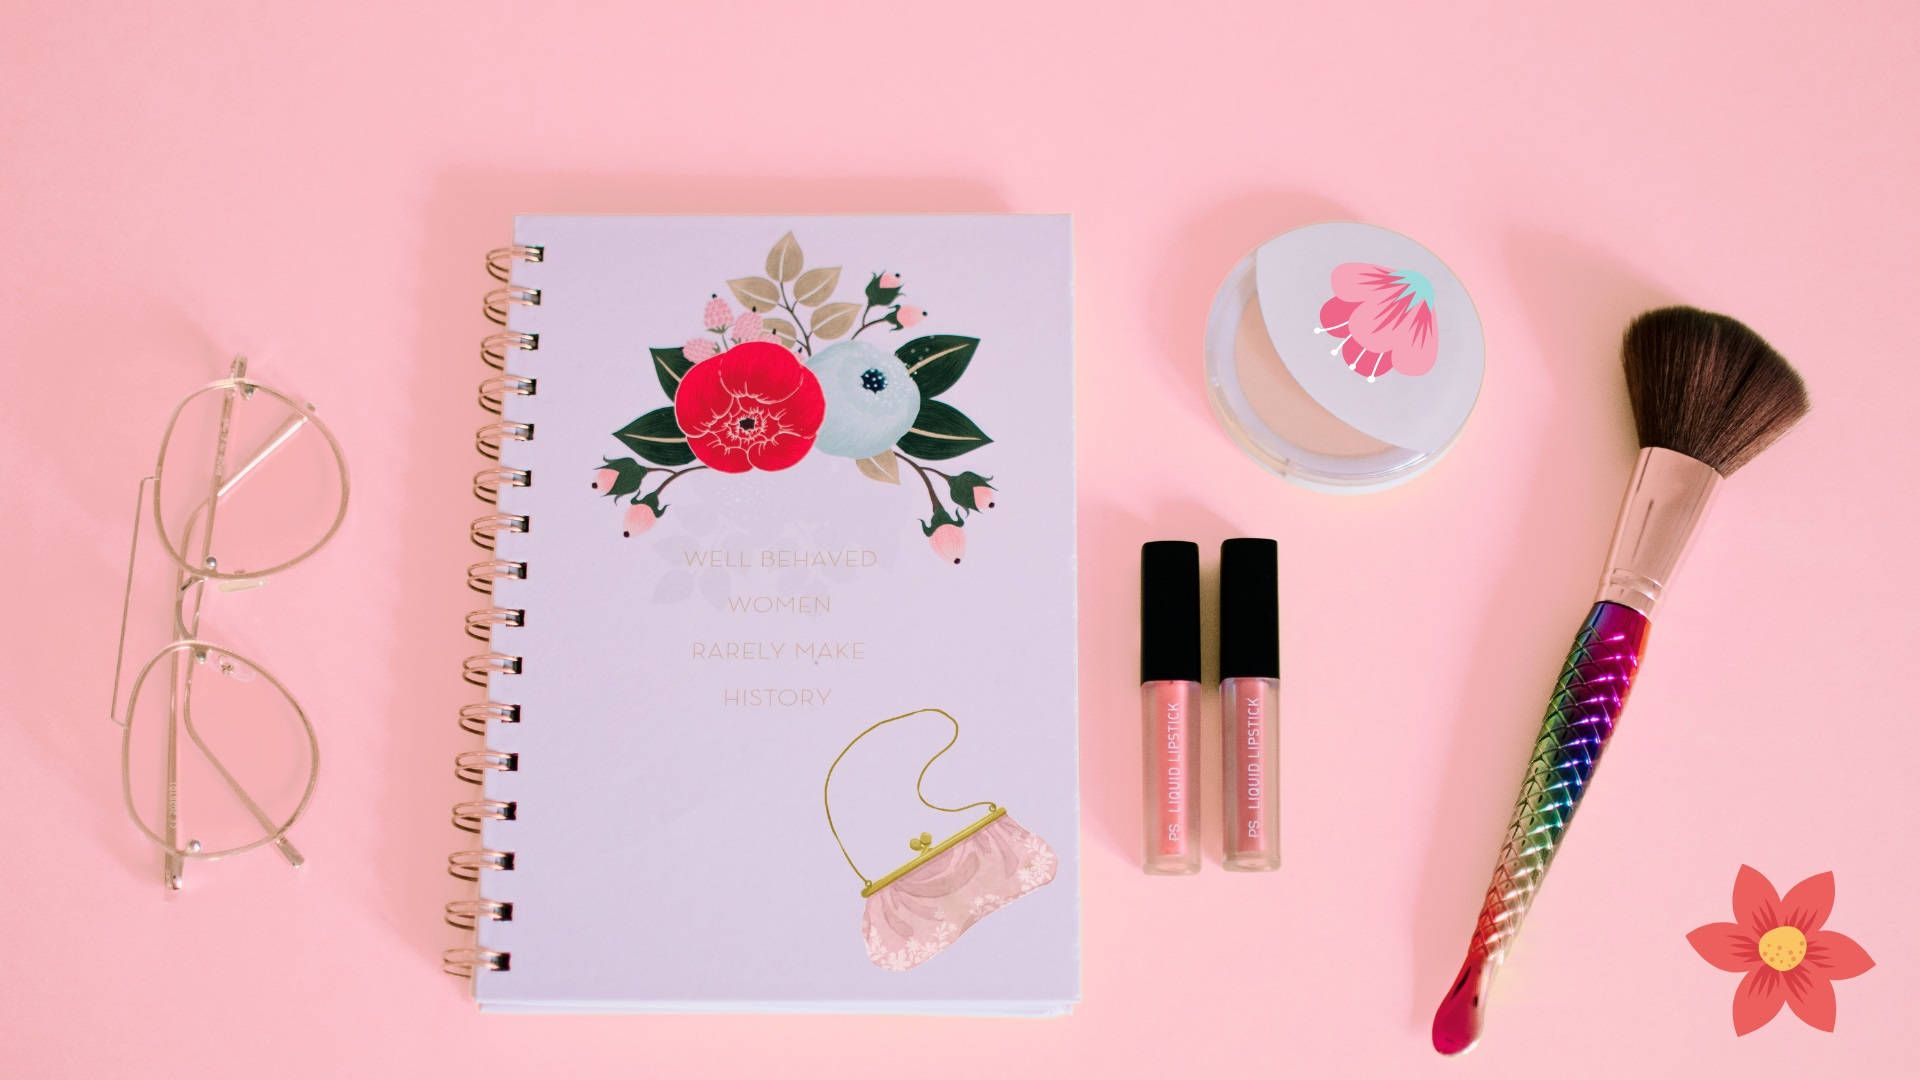 A makeup kit, notebook and other items on pink background - Makeup, flat lay